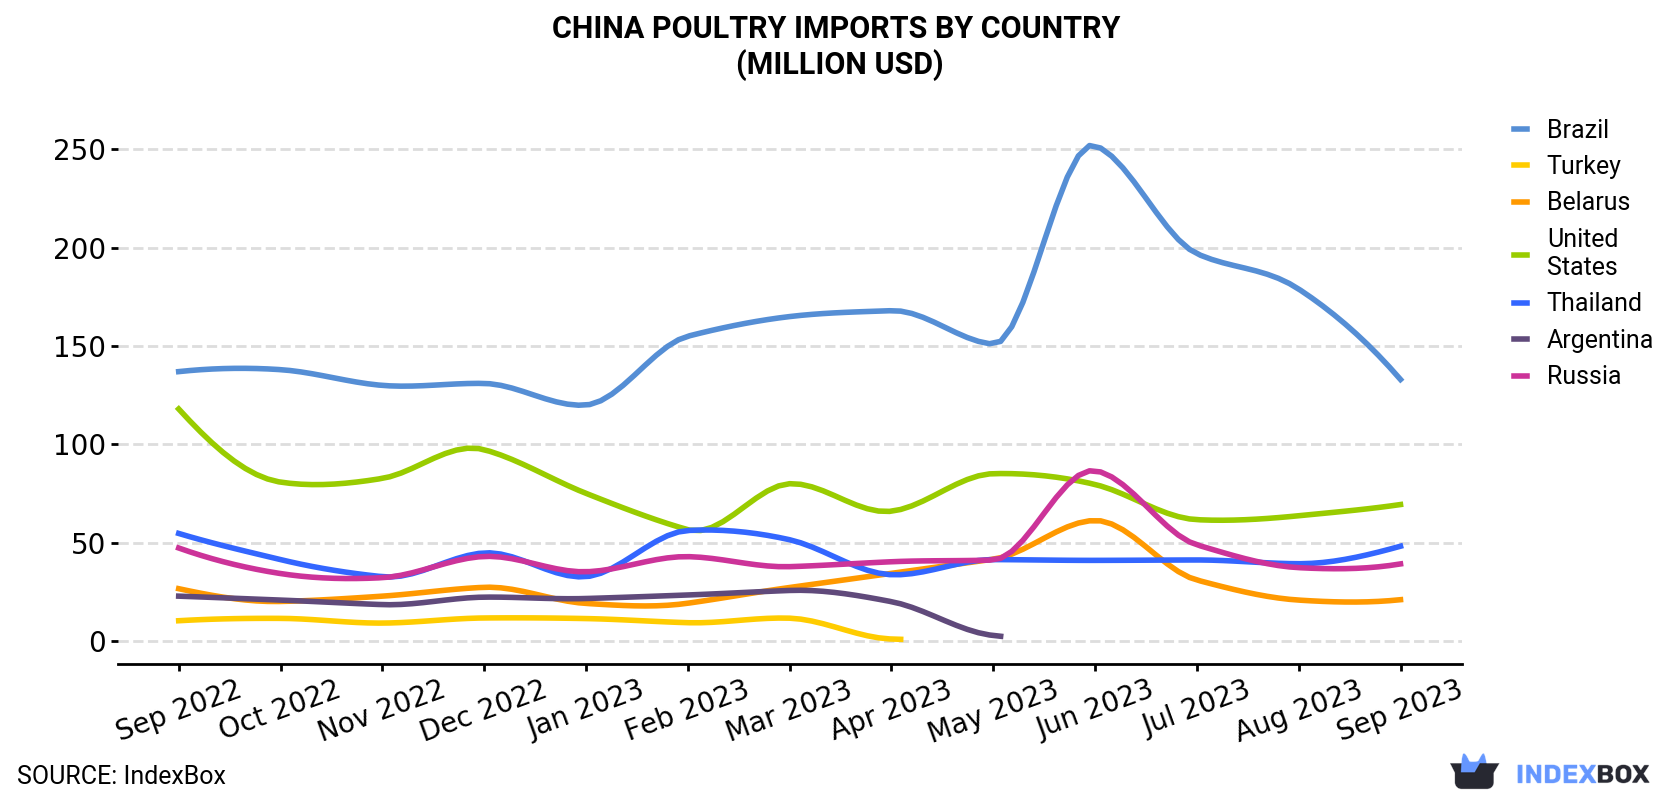 China Poultry Imports By Country (Million USD)